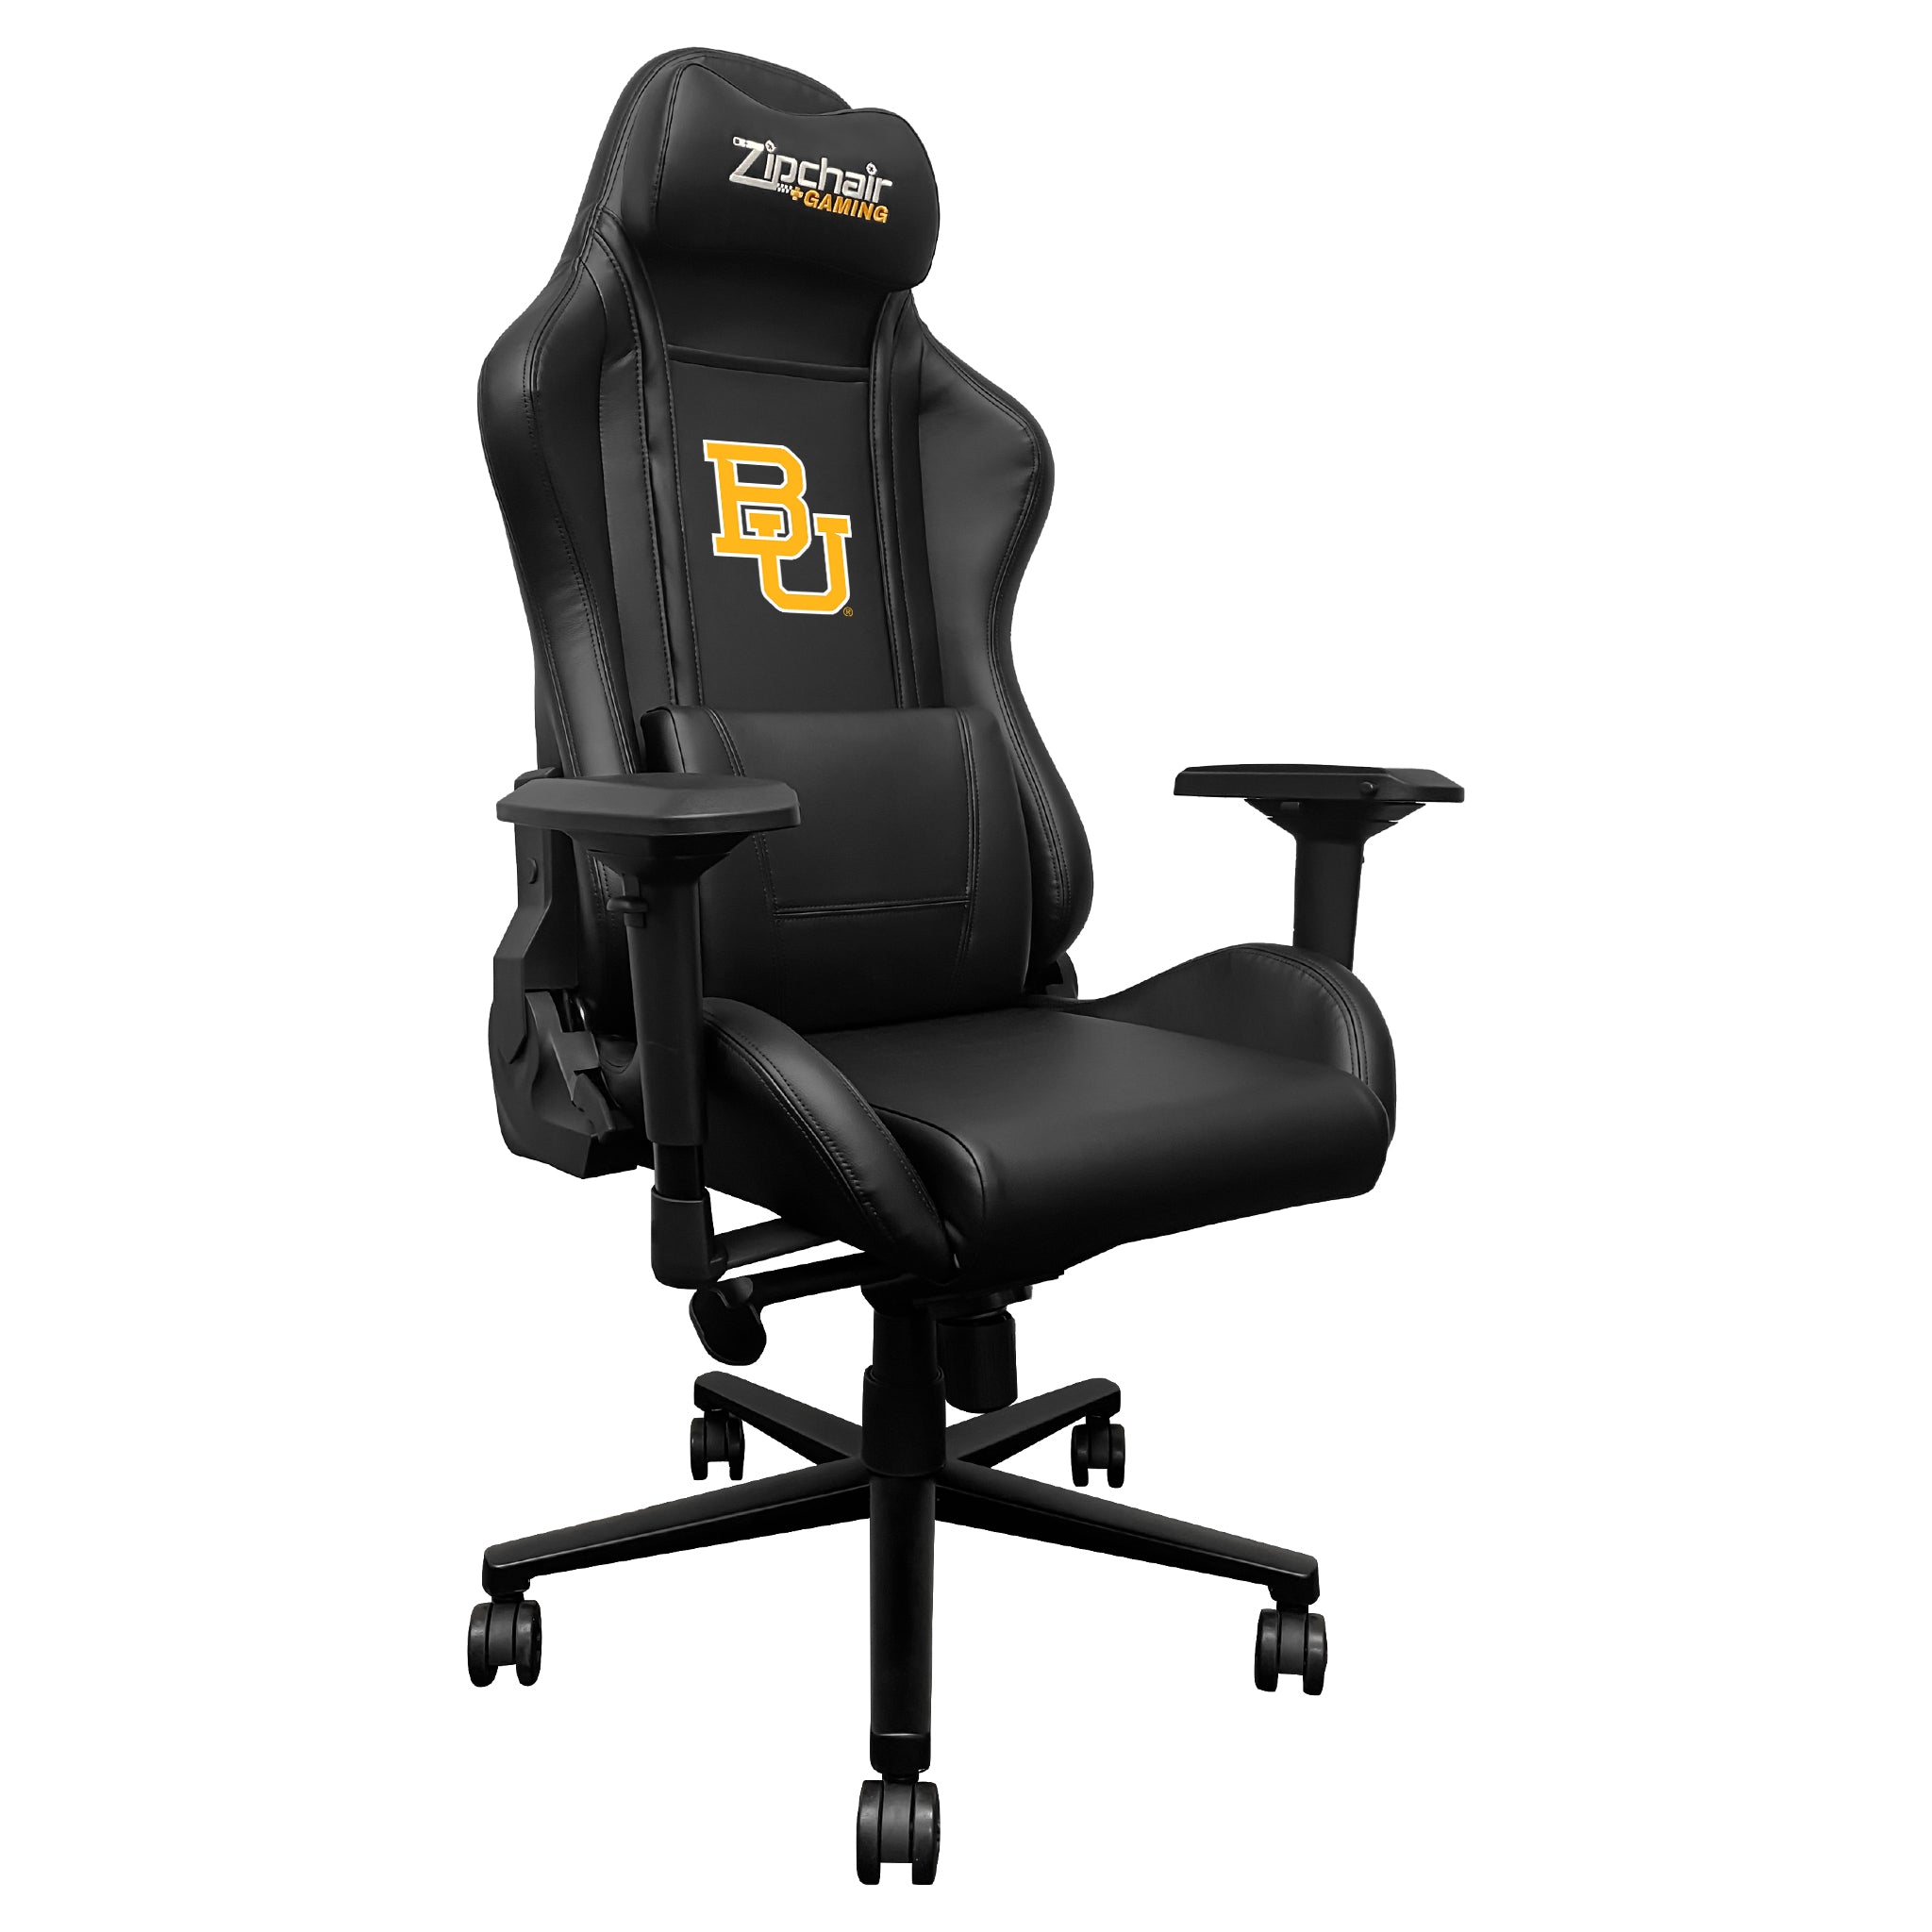 Baylor Bears Xpression Gaming Chair with Baylor Bears Logo